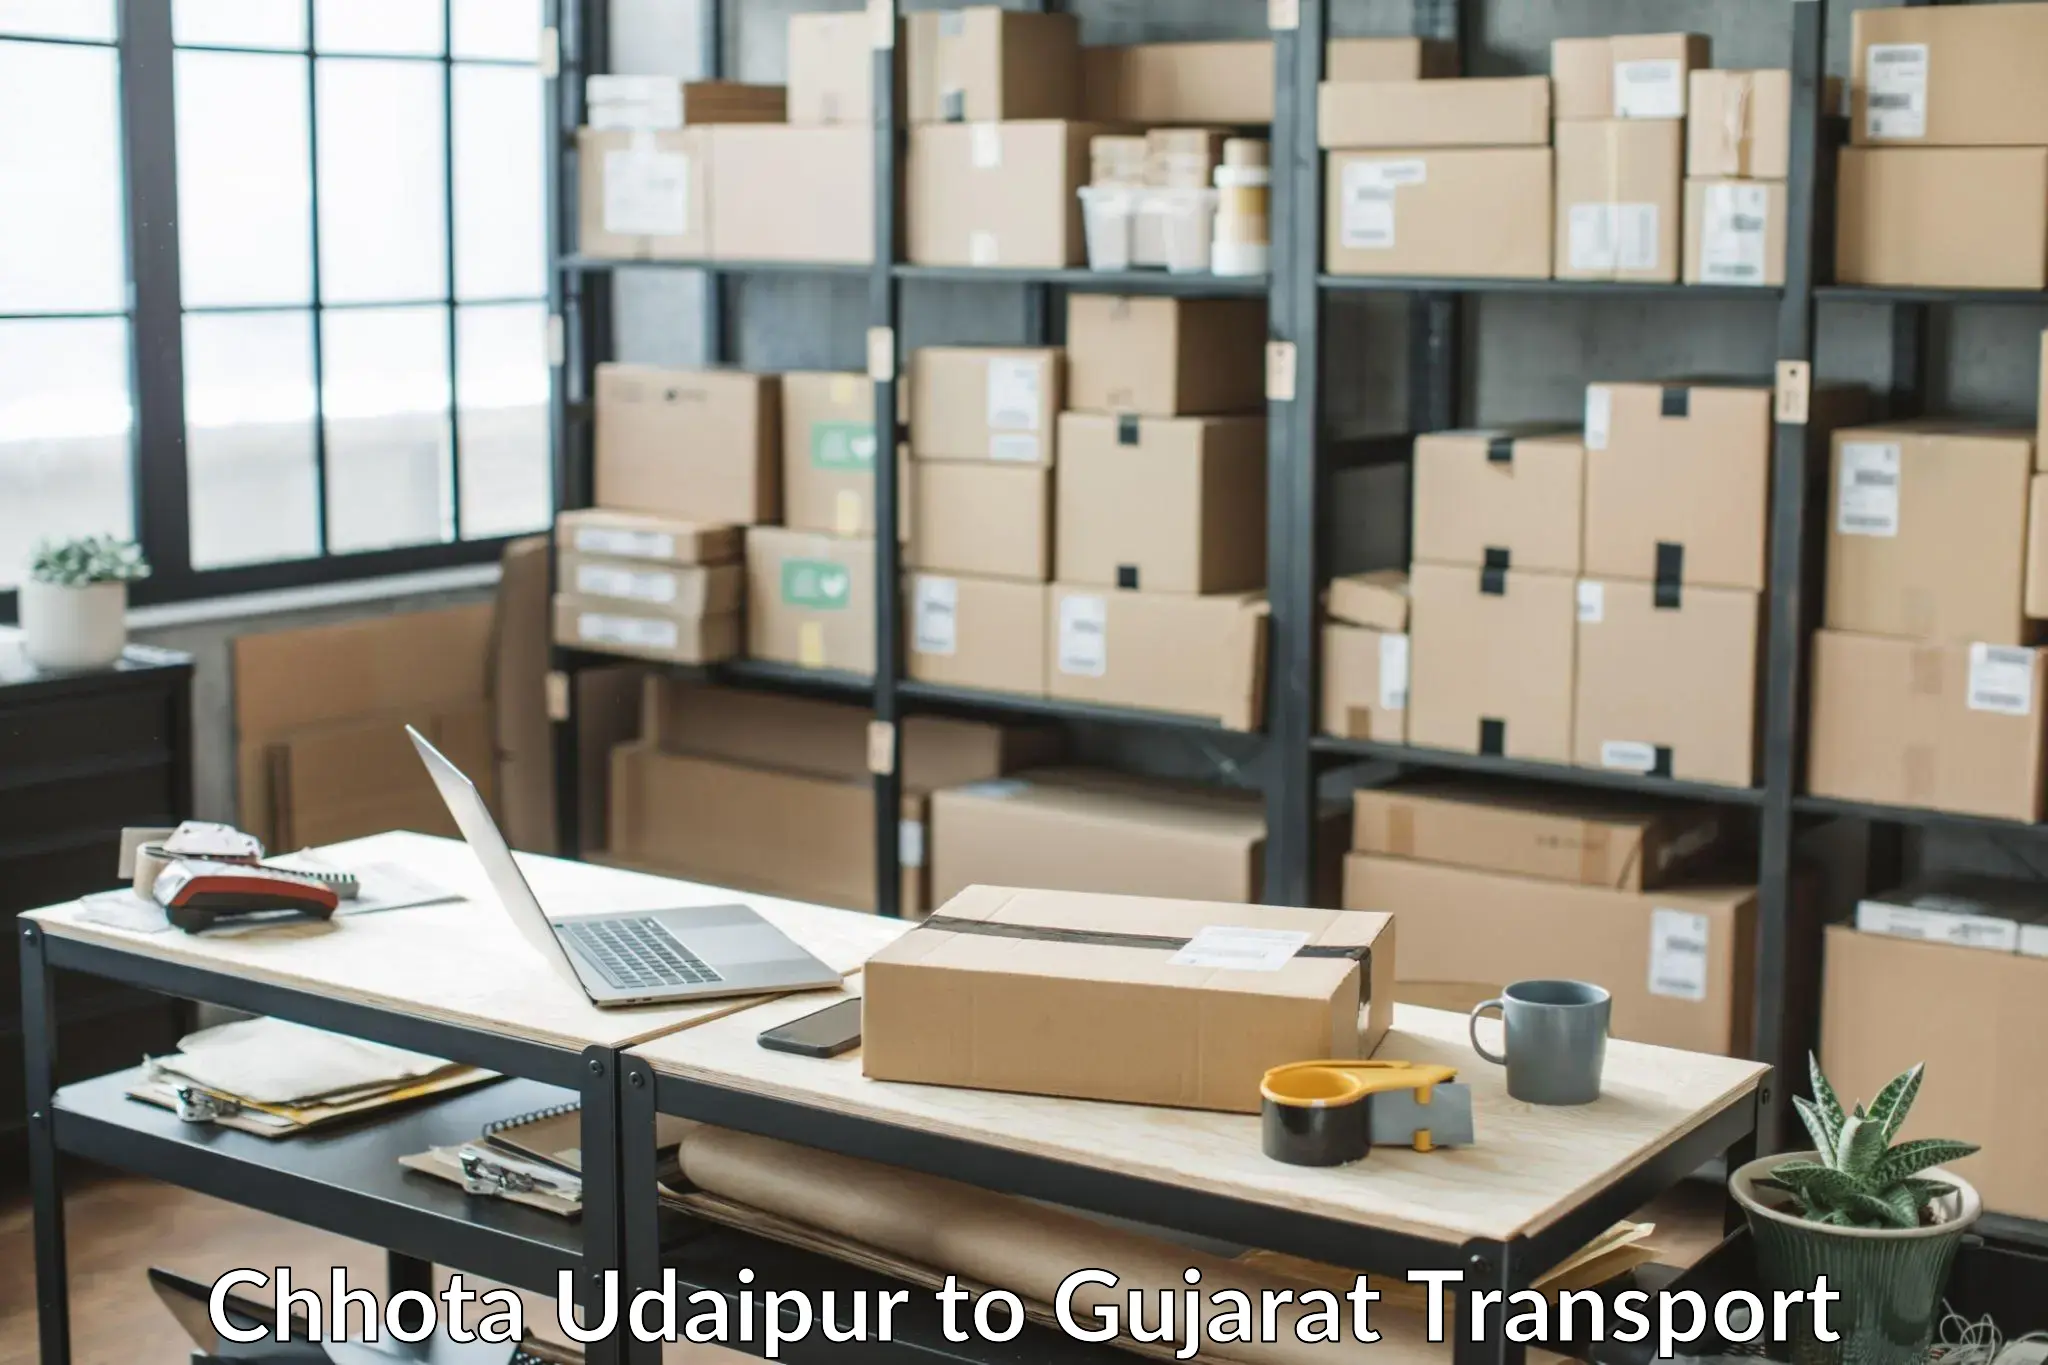 Road transport services in Chhota Udaipur to Himatnagar